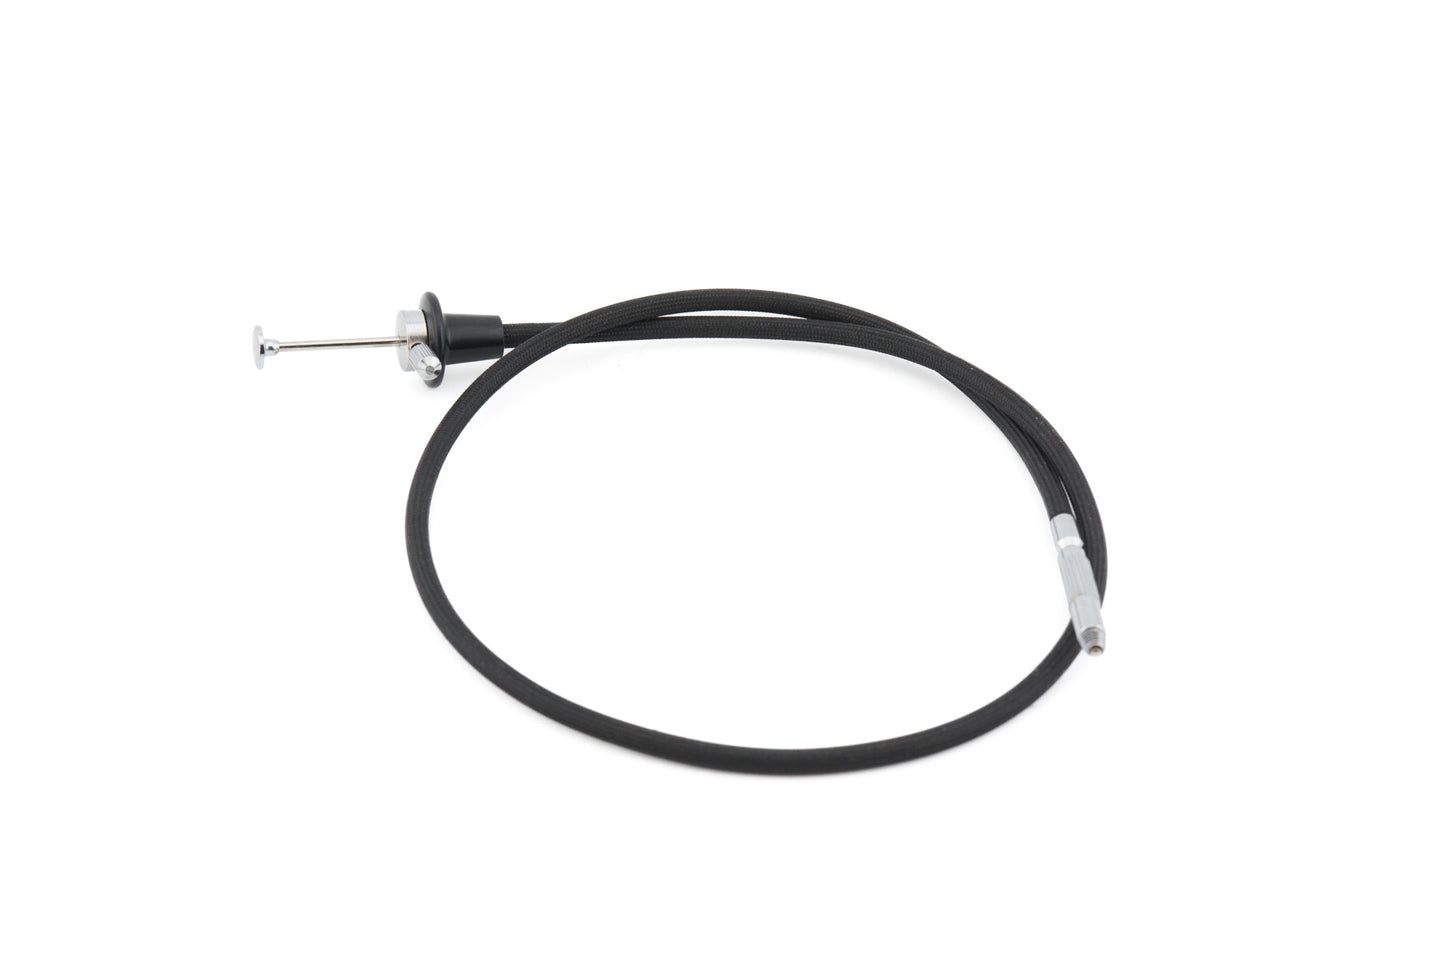 Rowi Mechanical Cable Release Cord - Accessory